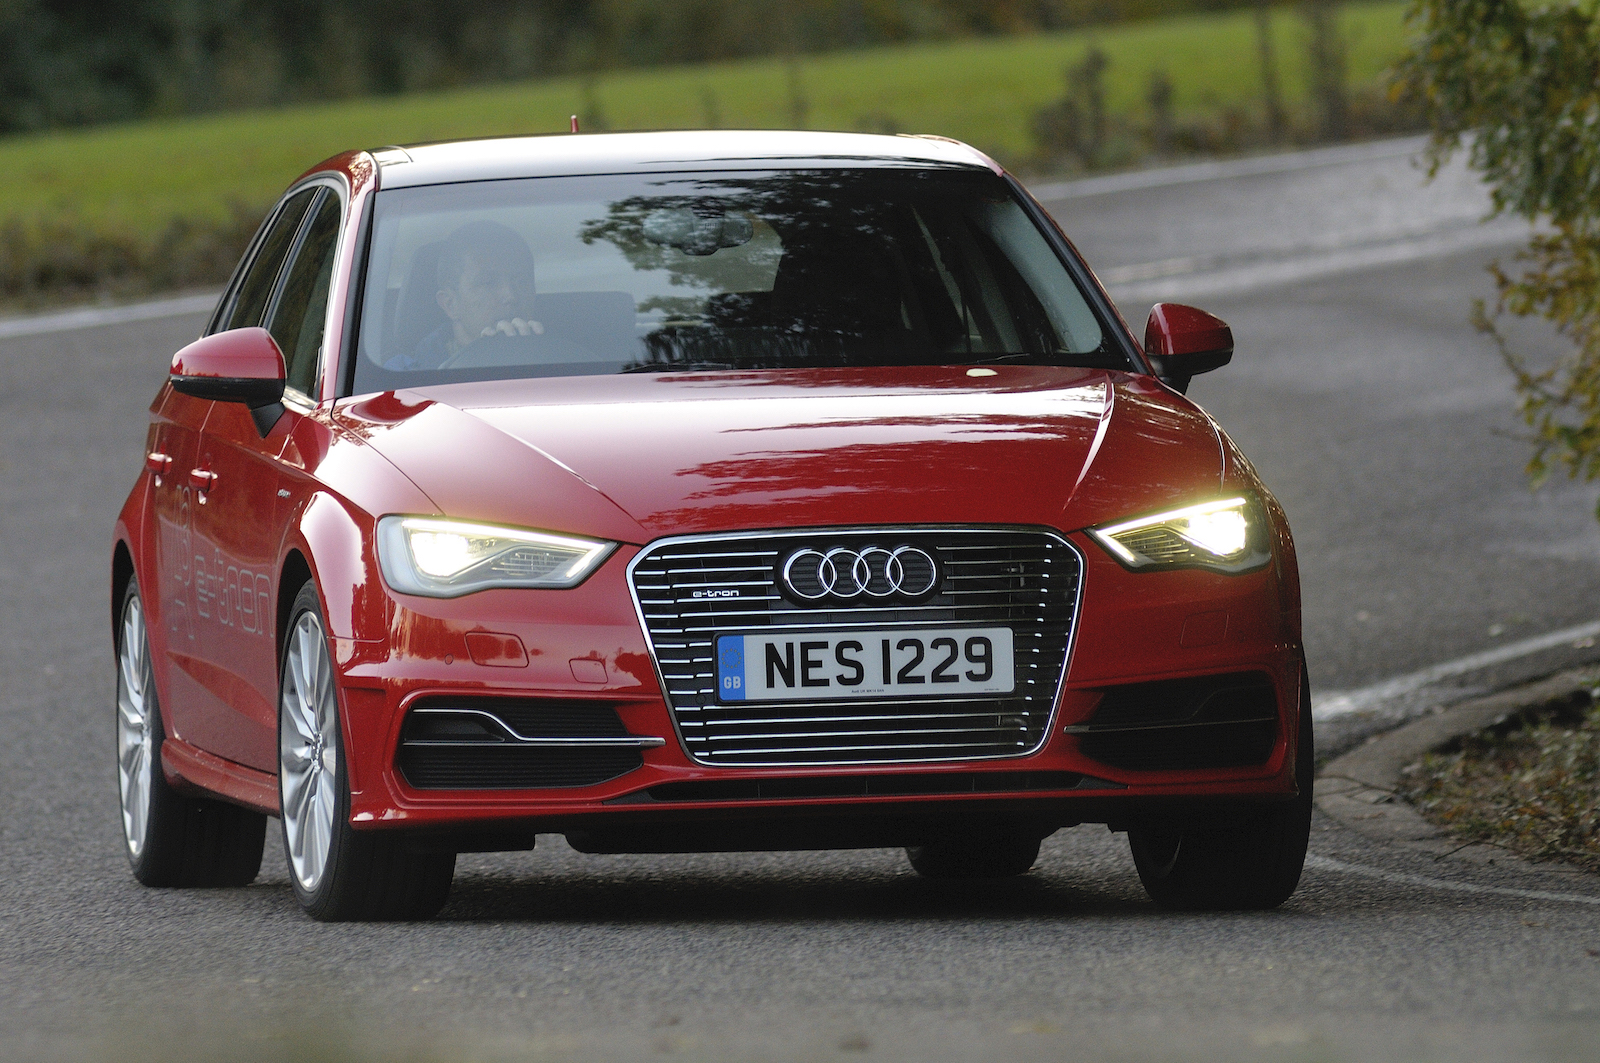 Haarvaten muur Markeer Used Audi A3 e-tron buying guide | DrivingElectric